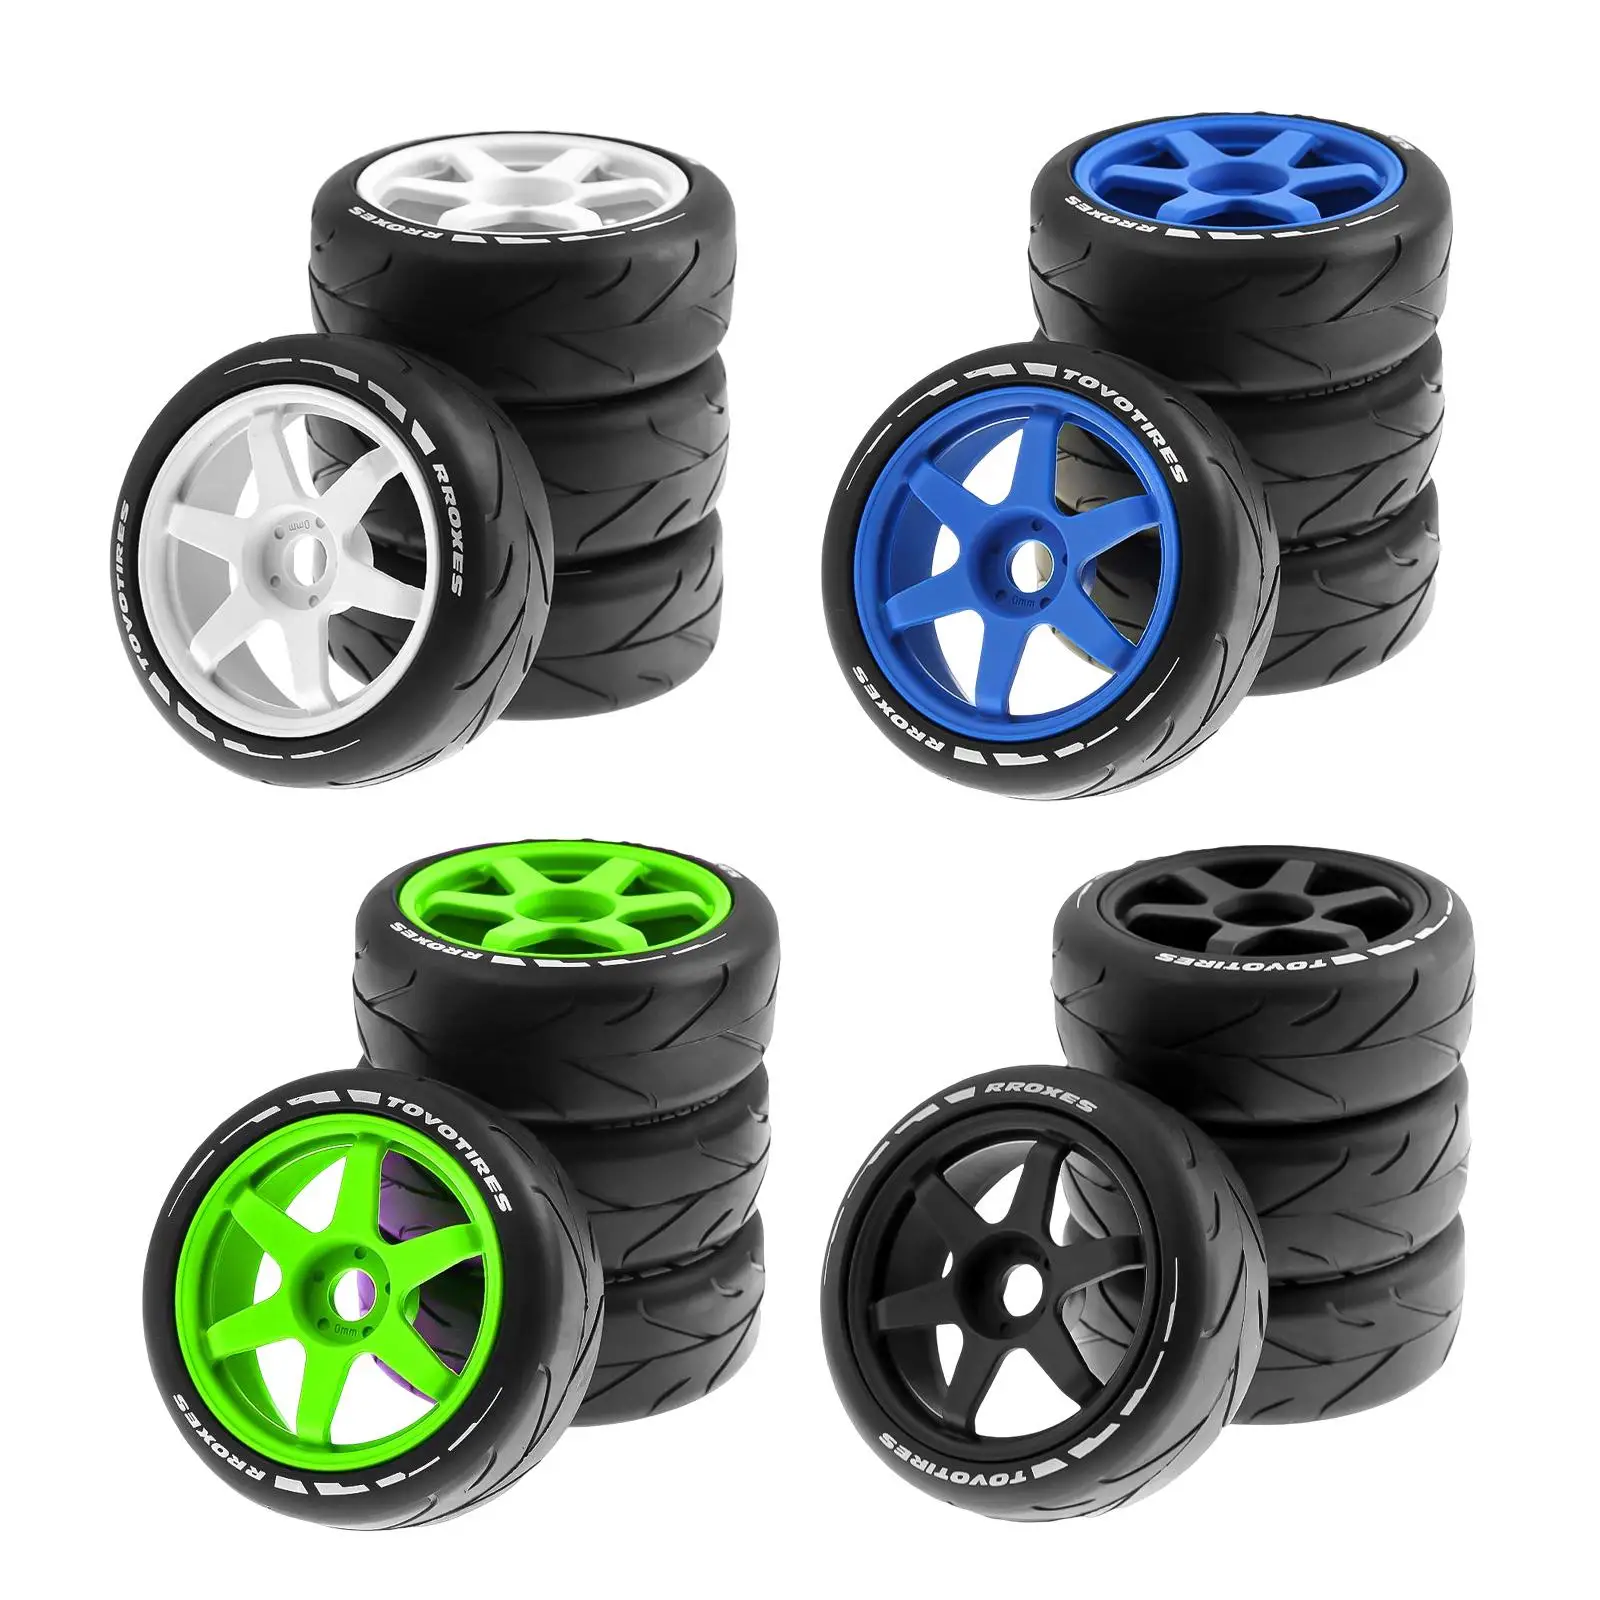 4 Pieces Rubber Wheel Rim and Tires Replacements for 1:8 Scale Trucks Crawler RC Car DIY Accessory